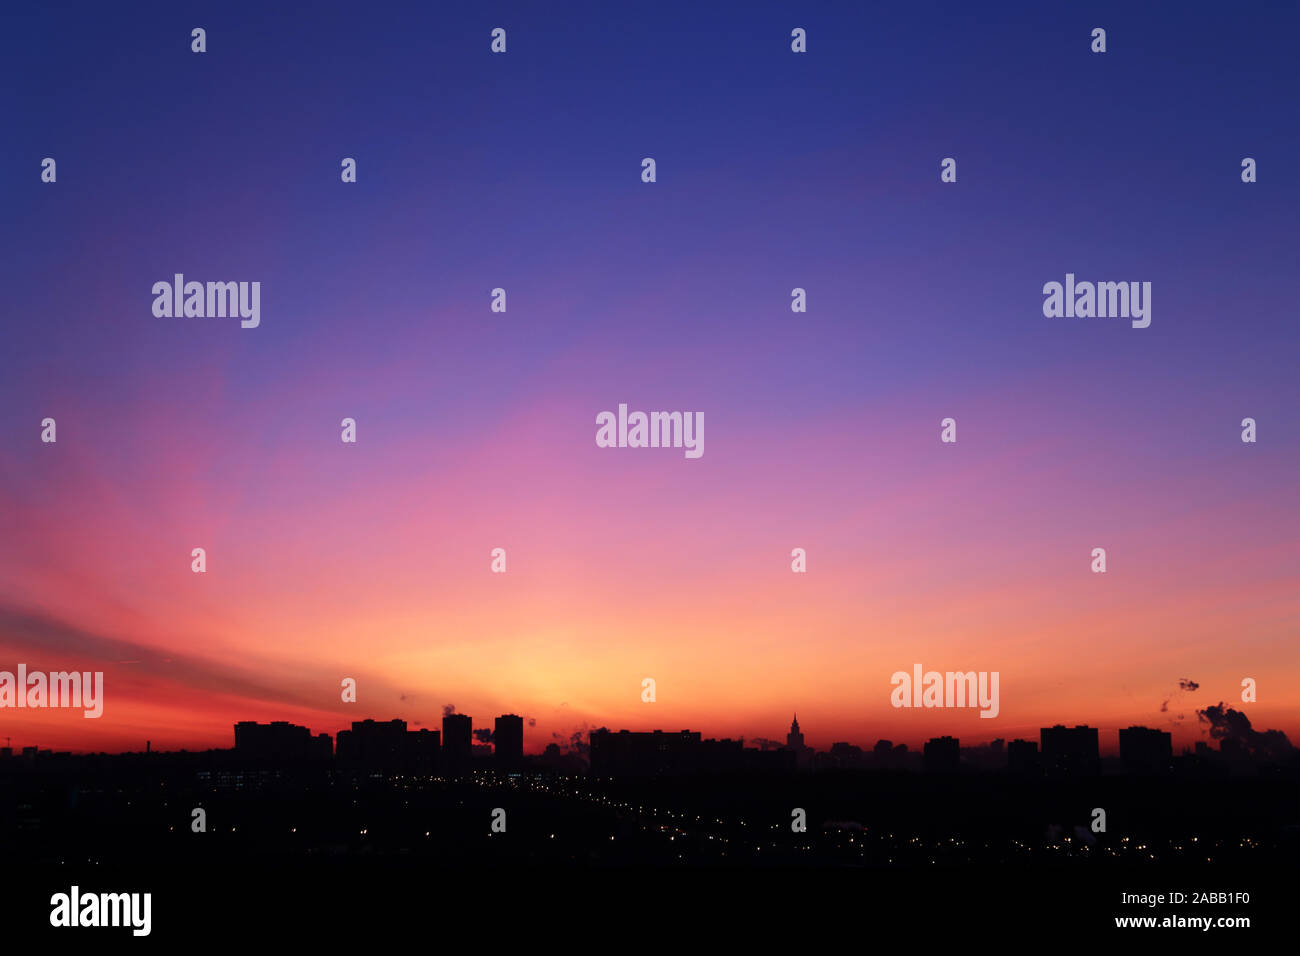 Sunrise over the city, scenic view. Pink-blue sky and cirrus clouds in soft colors above black silhouettes of high-rise buildings, colorful cityscape Stock Photo